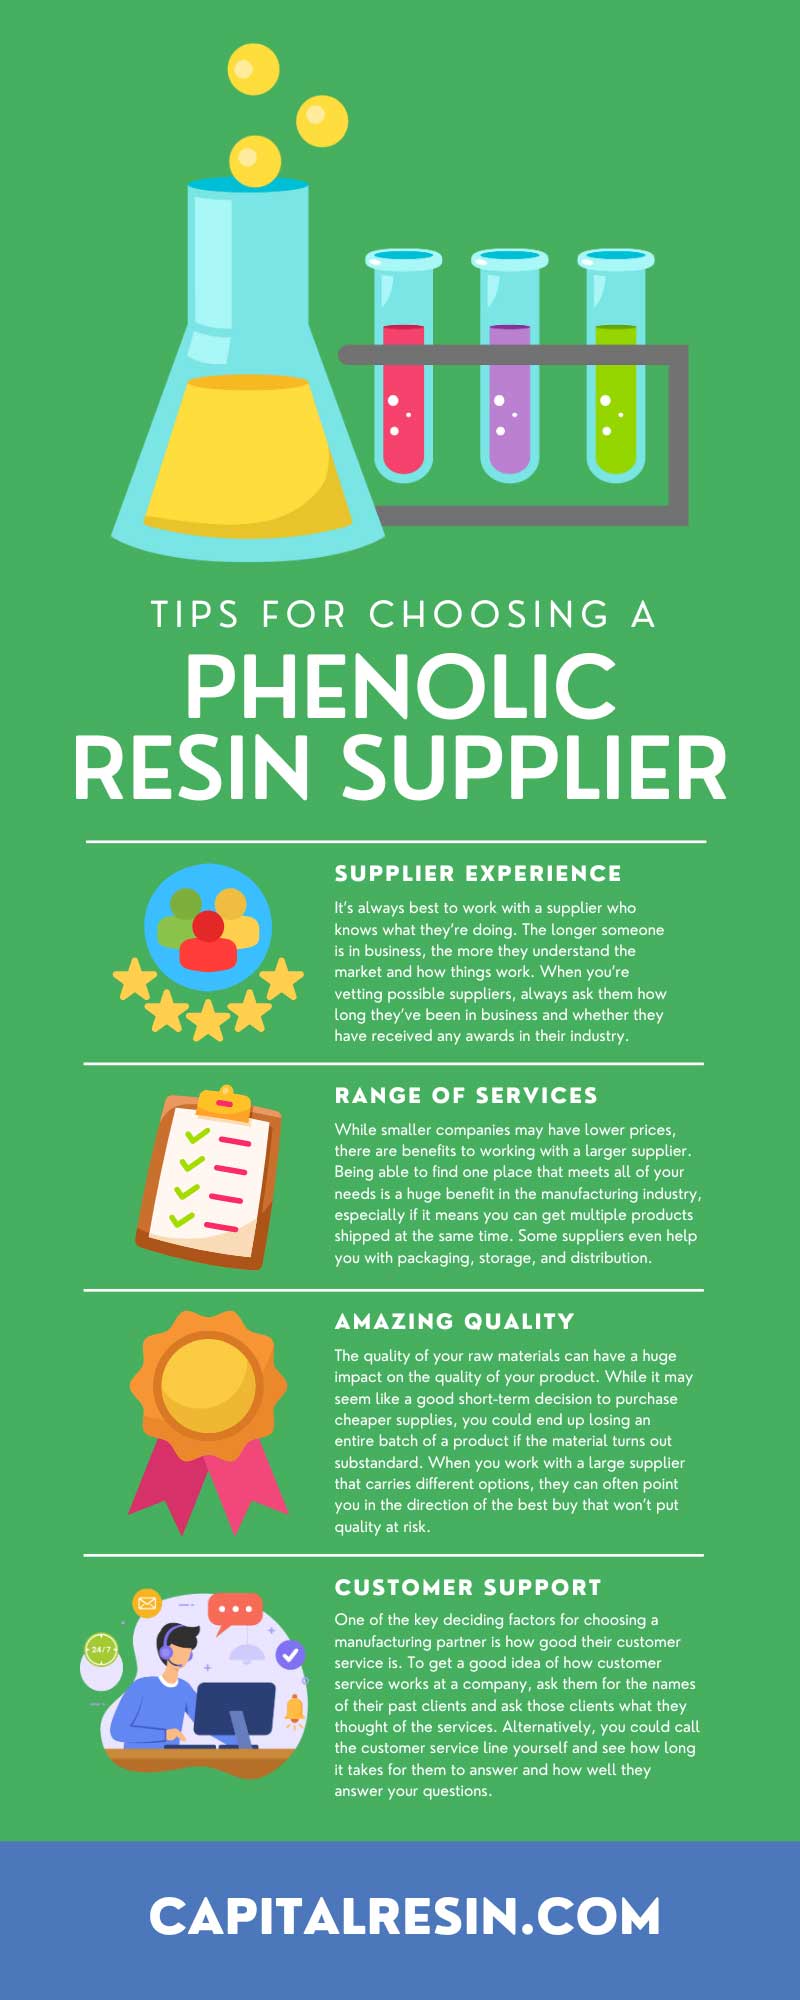 5 Tips for Choosing a Phenolic Resin Supplier